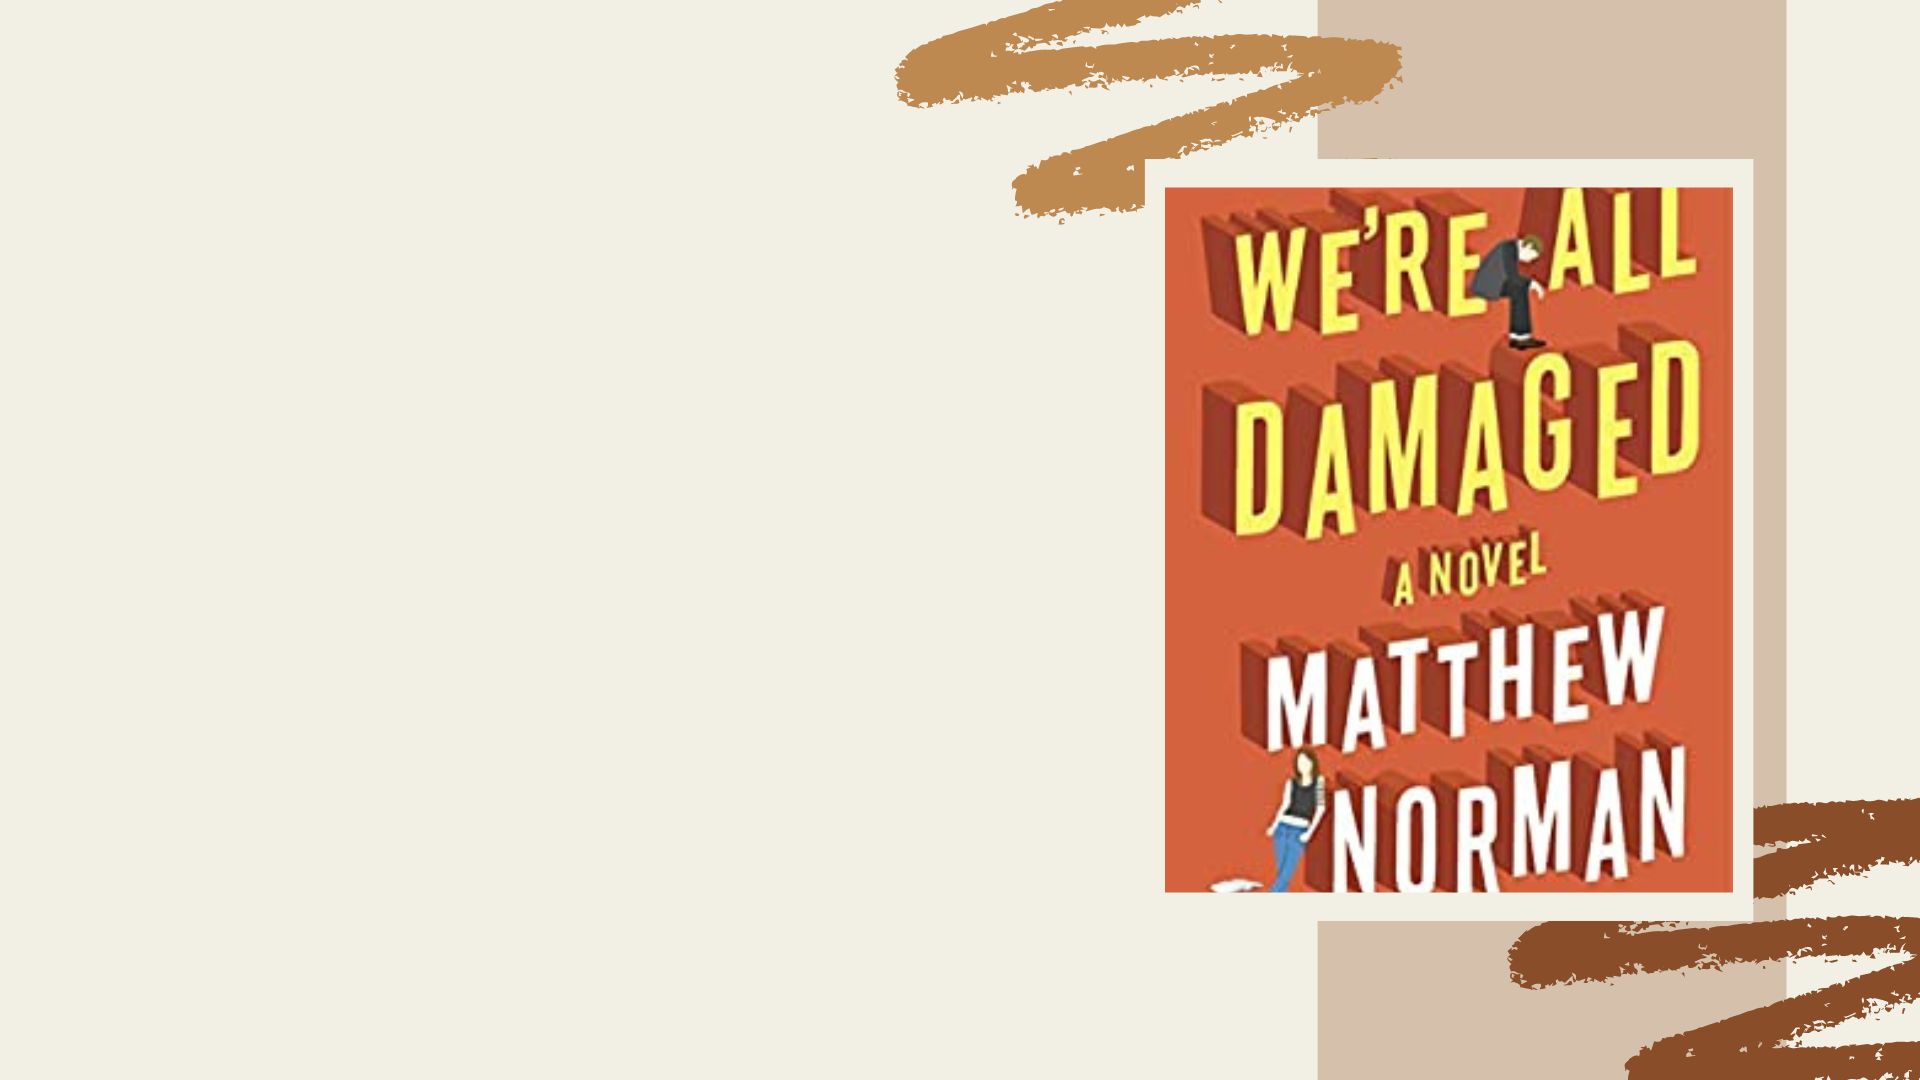 review We're all damaged matthew Norman grappig boek over disfunctionele familie